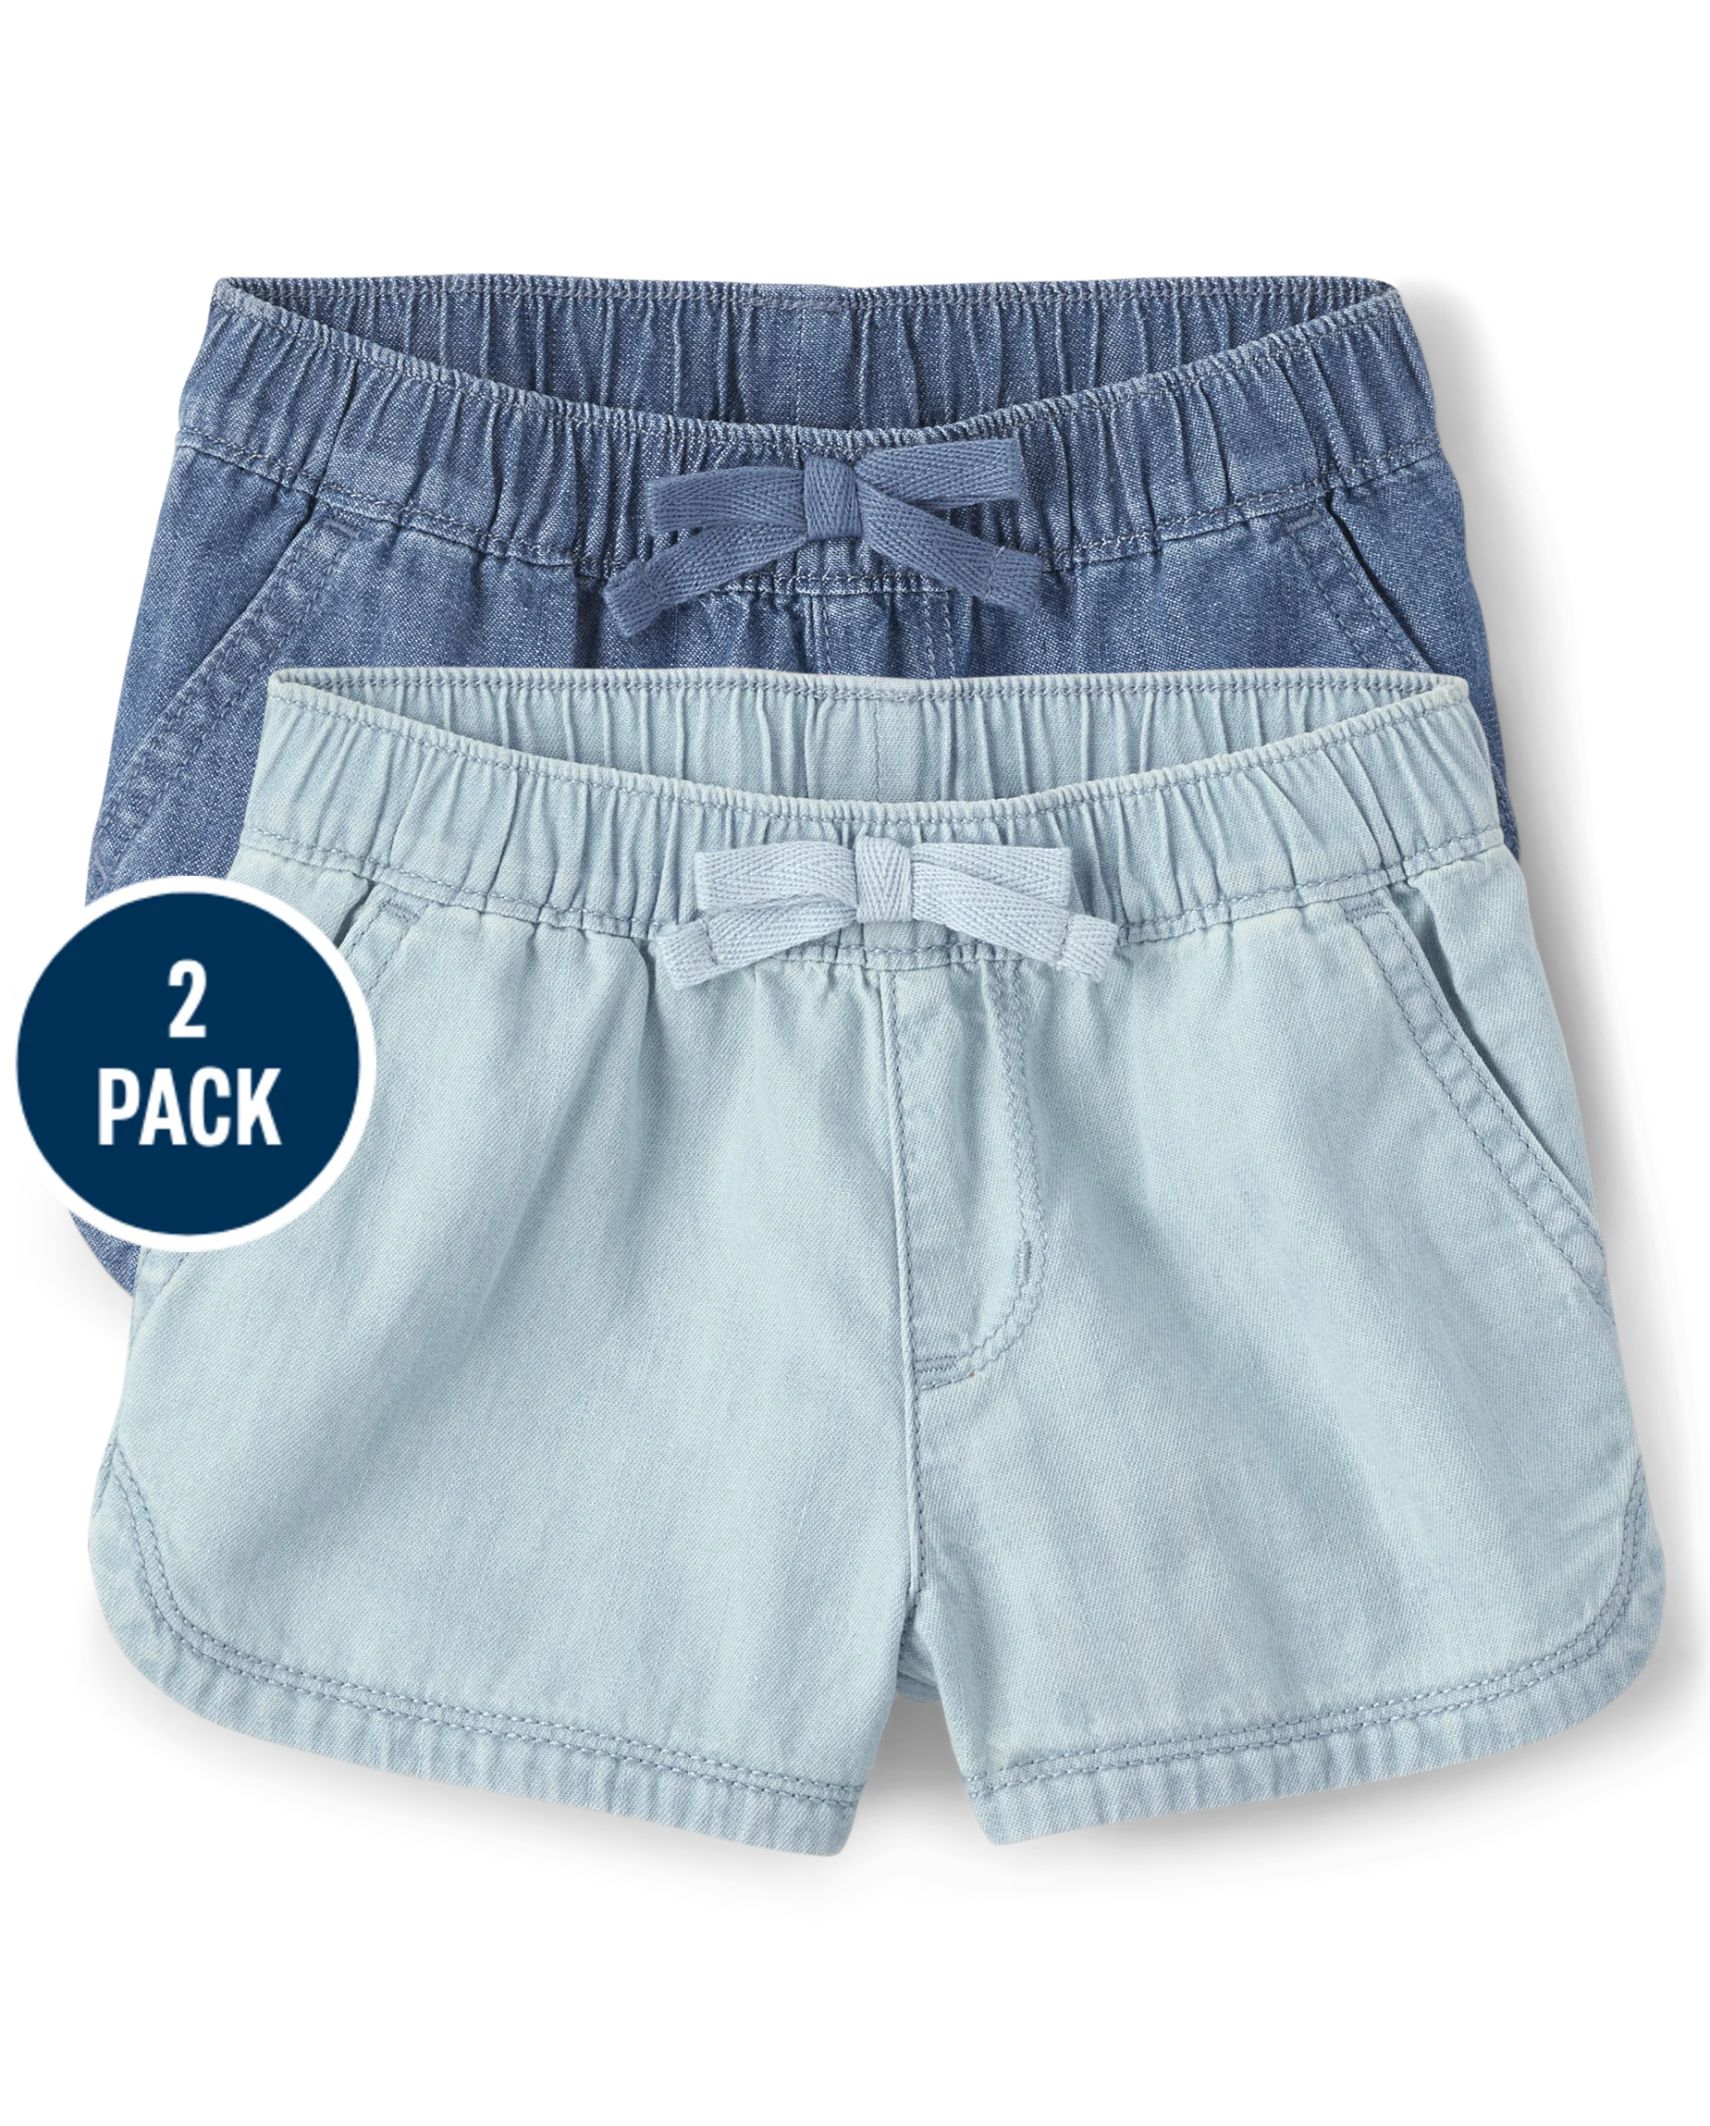 Toddler Girls Chambray Pull On Shorts 2-Pack - rose wash | The Children's Place